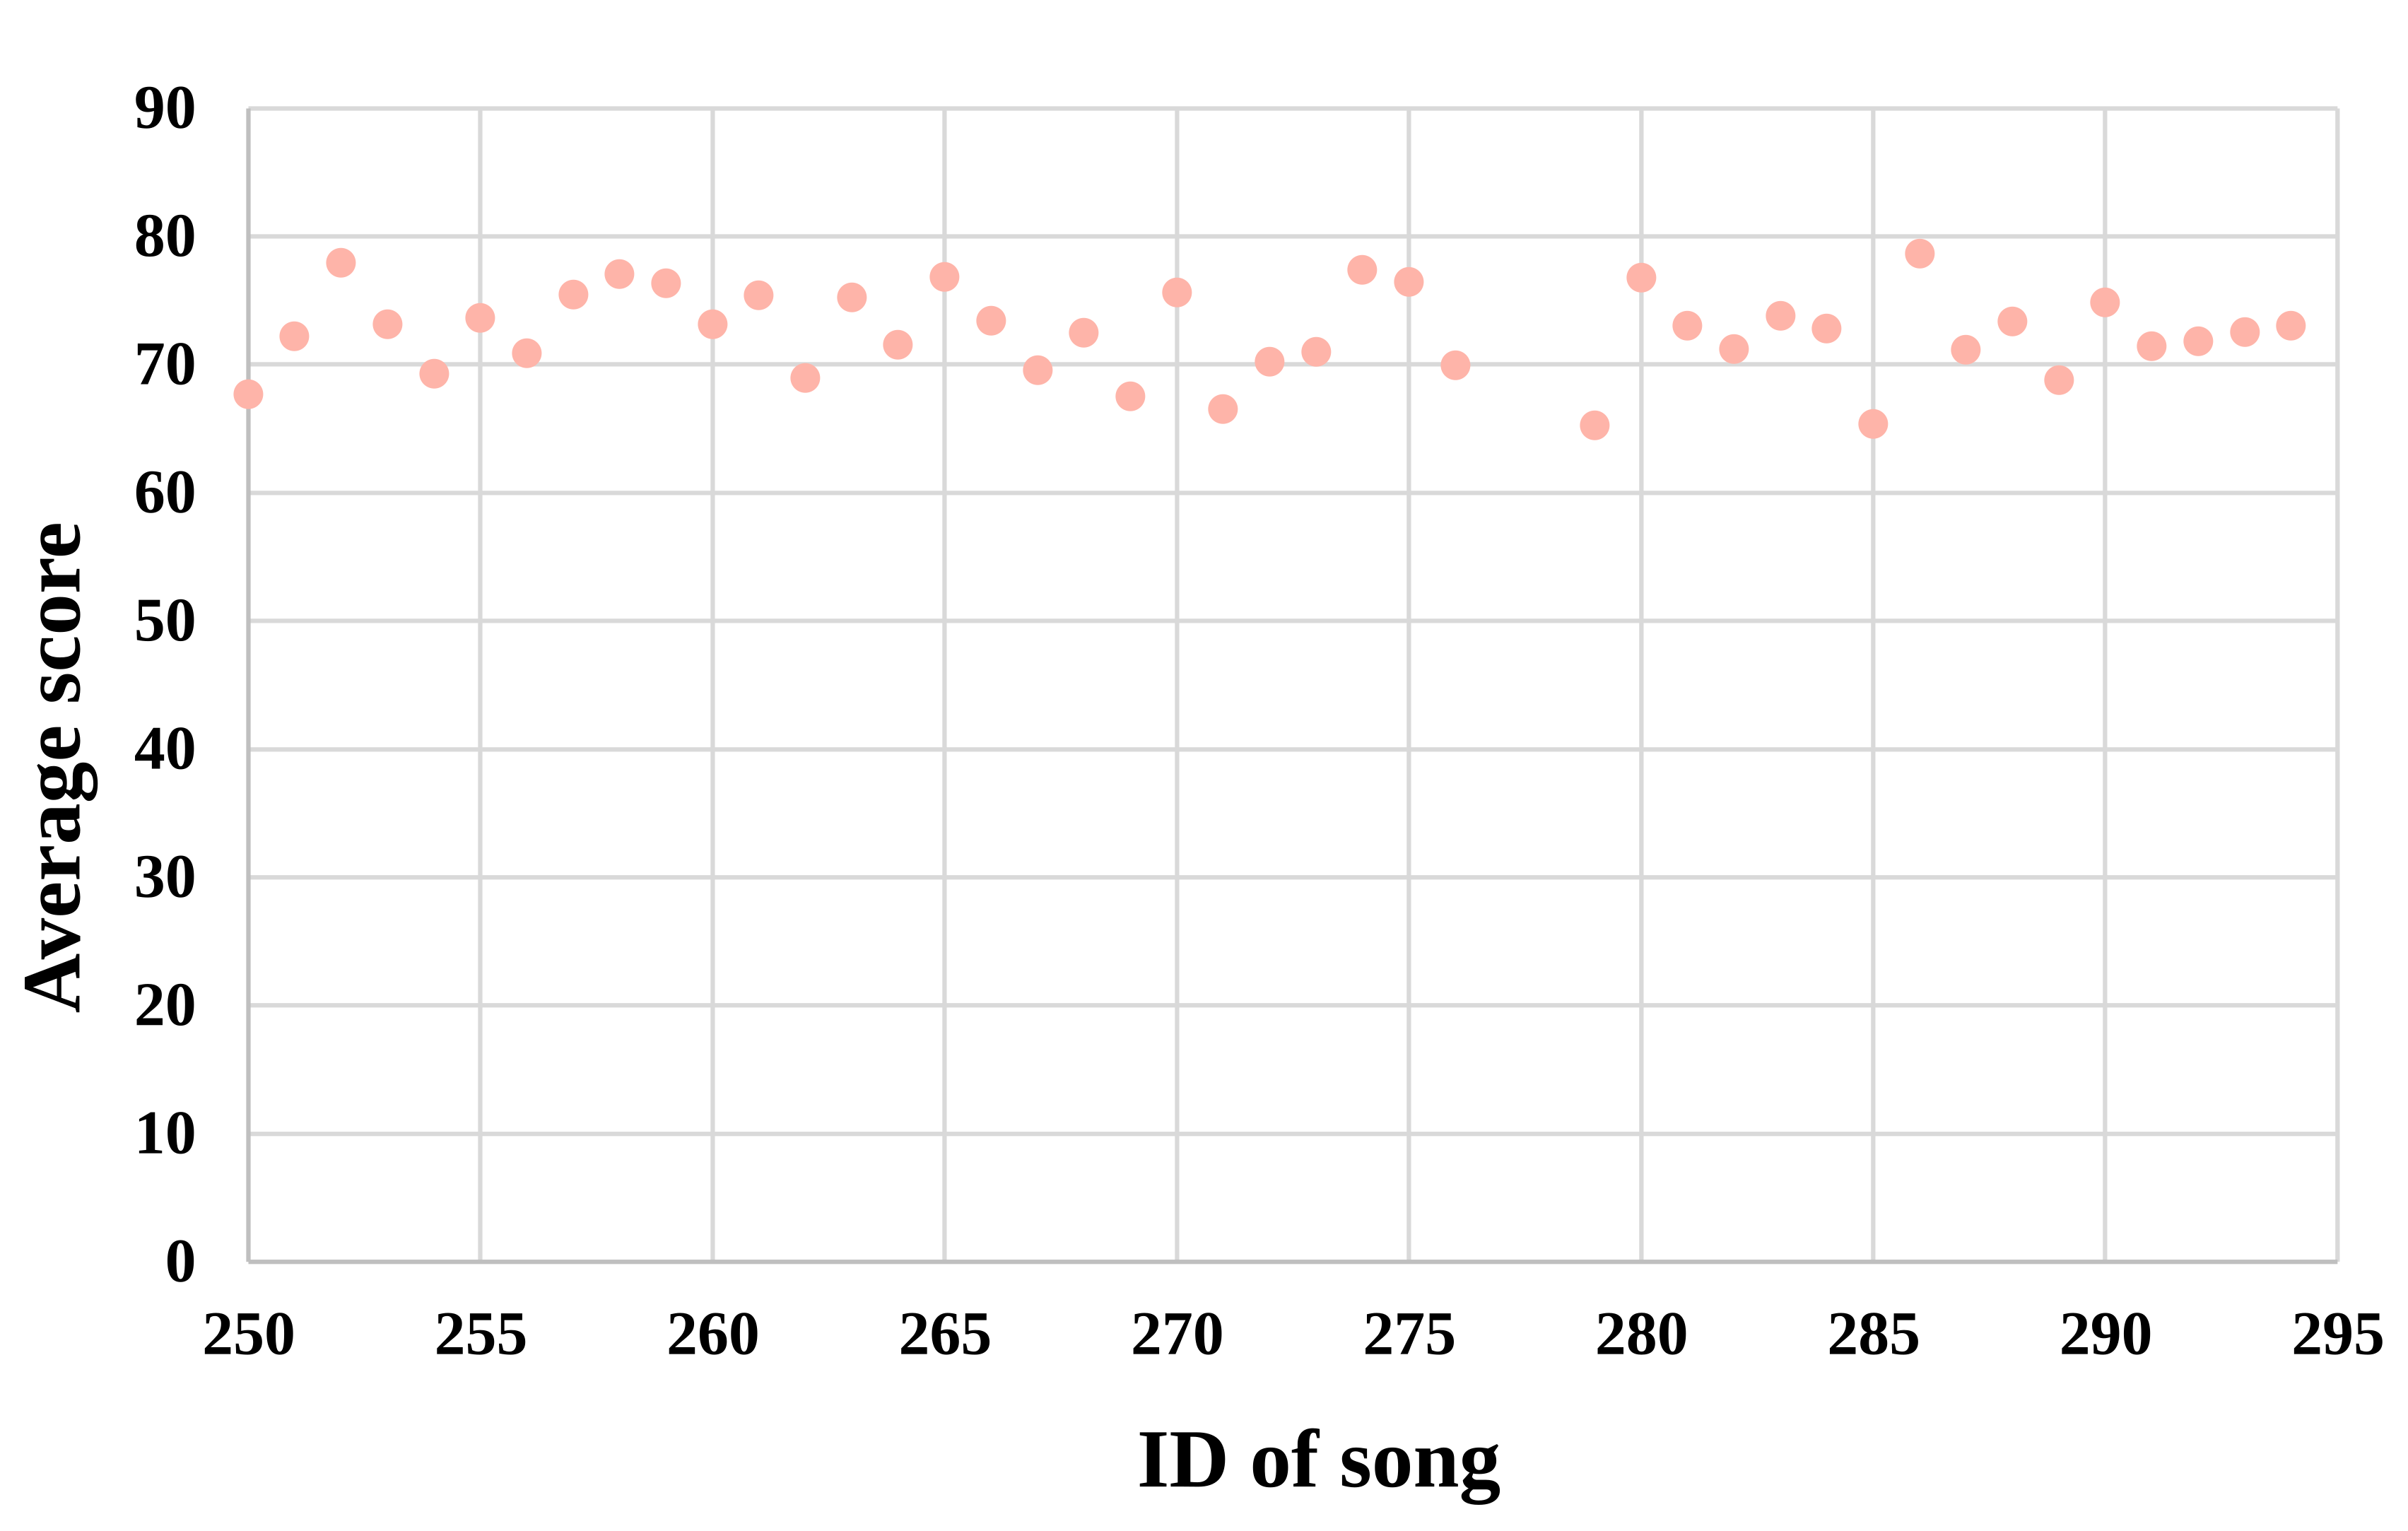 Distribution of the average scores of different songs. Horizontal axis: ID of song, vertical axis: Average score.